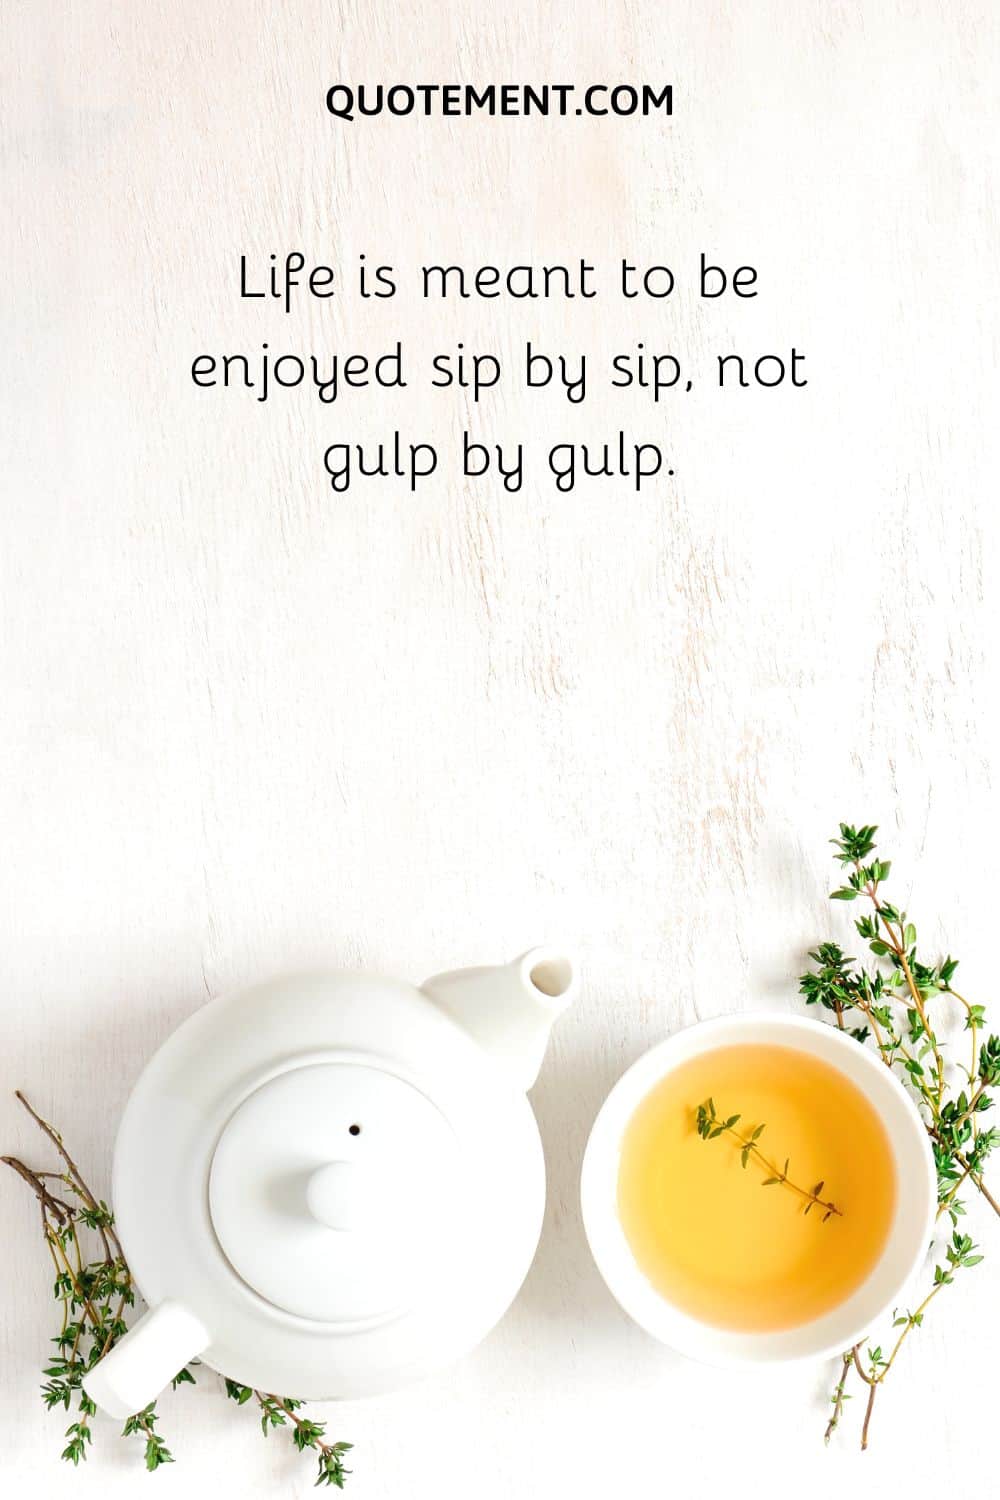 Life is meant to be enjoyed sip by sip, not gulp by gulp.